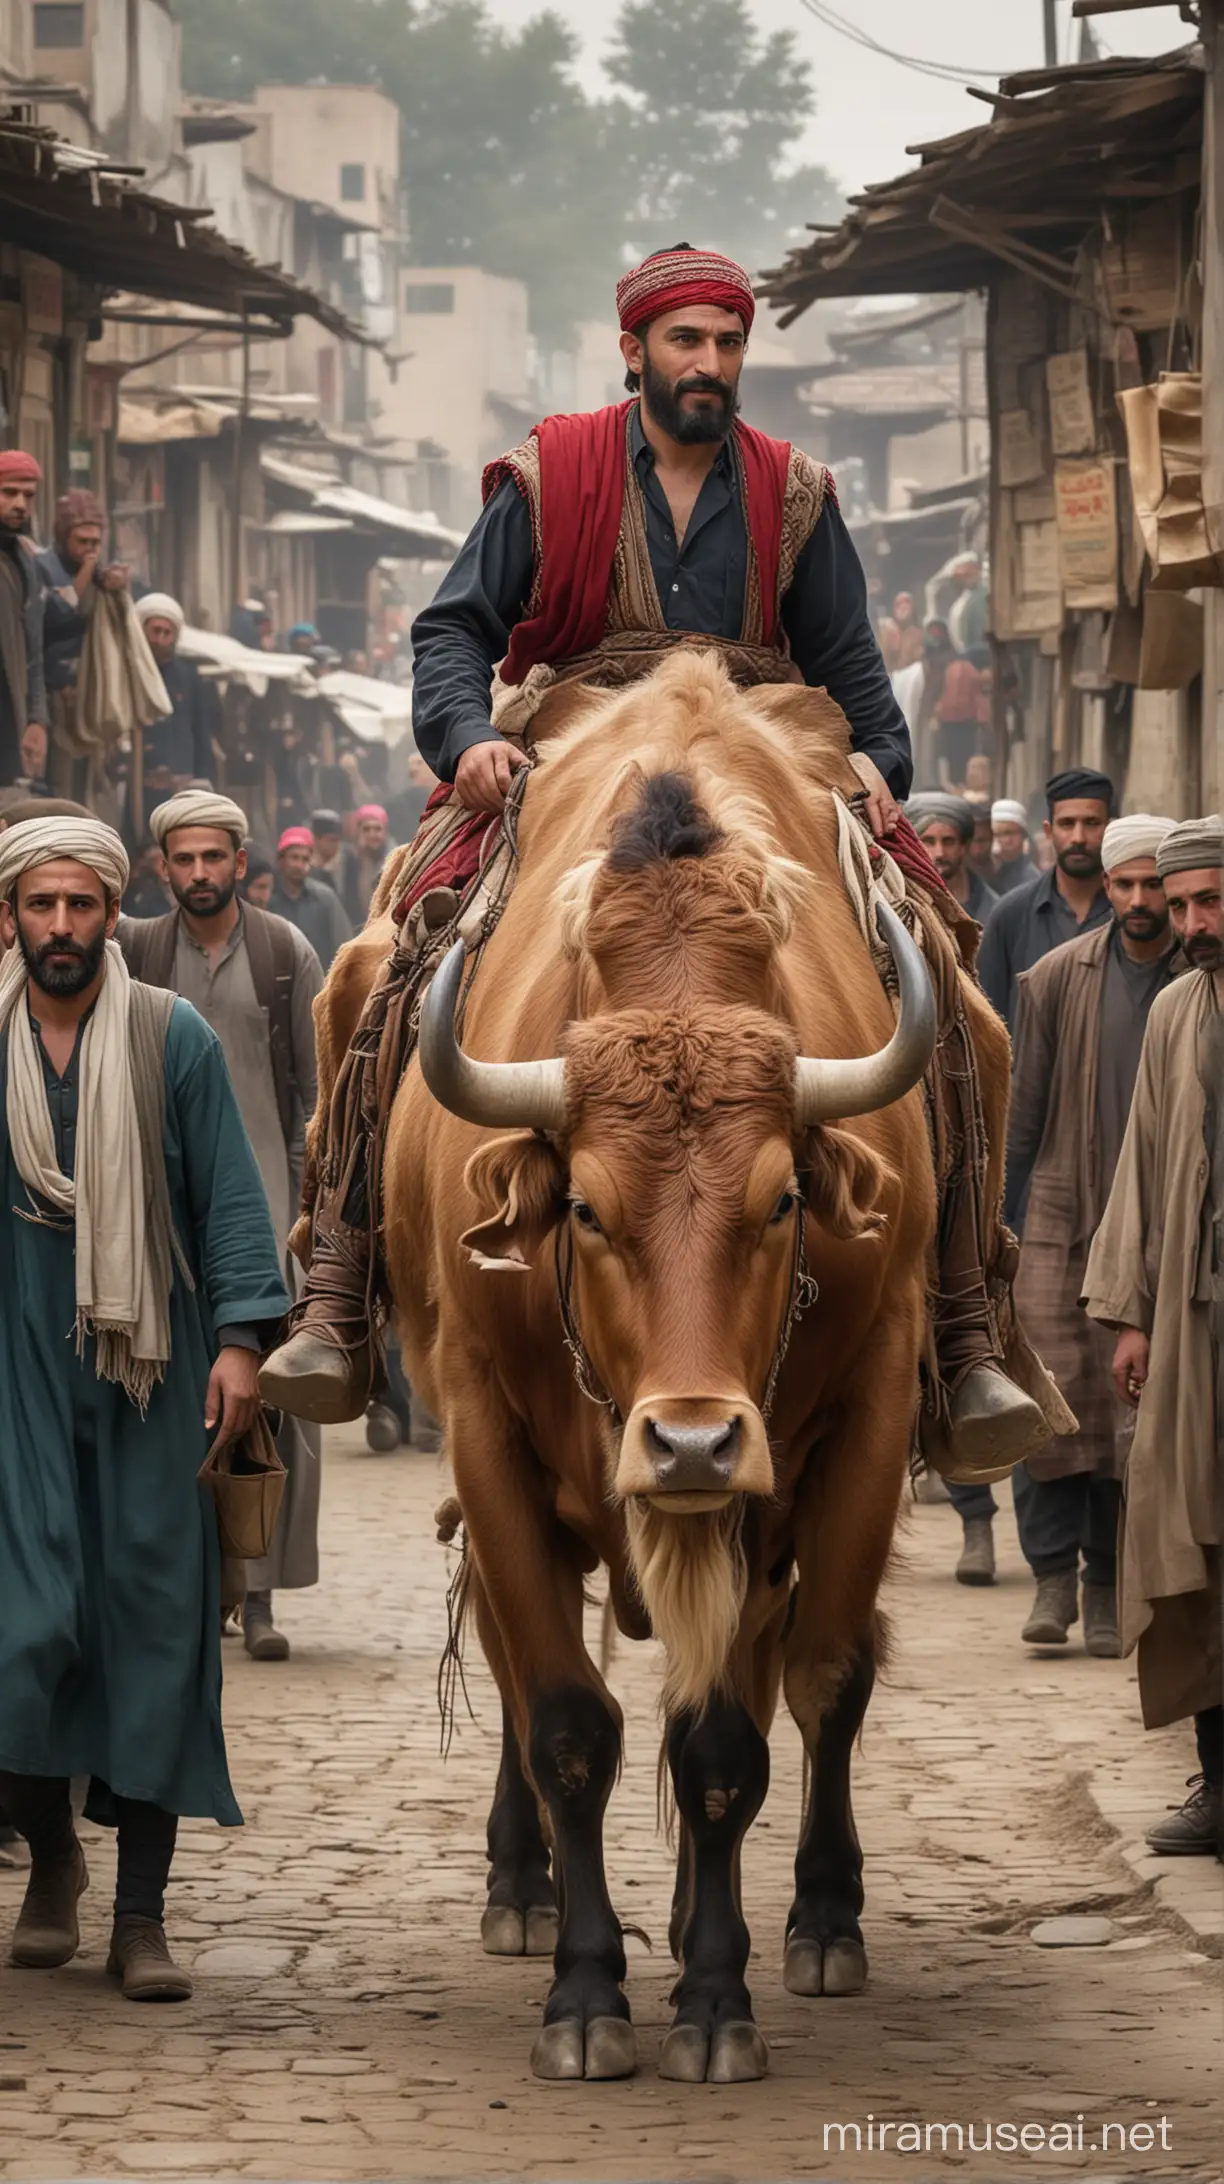 The scene in the Ottoman Empire where Şamil Alp carries a big ox on his back in the market: It can be seen that Şamil Alp is carrying an ox on his back in the market and the people around him are walking around with confused expressions.